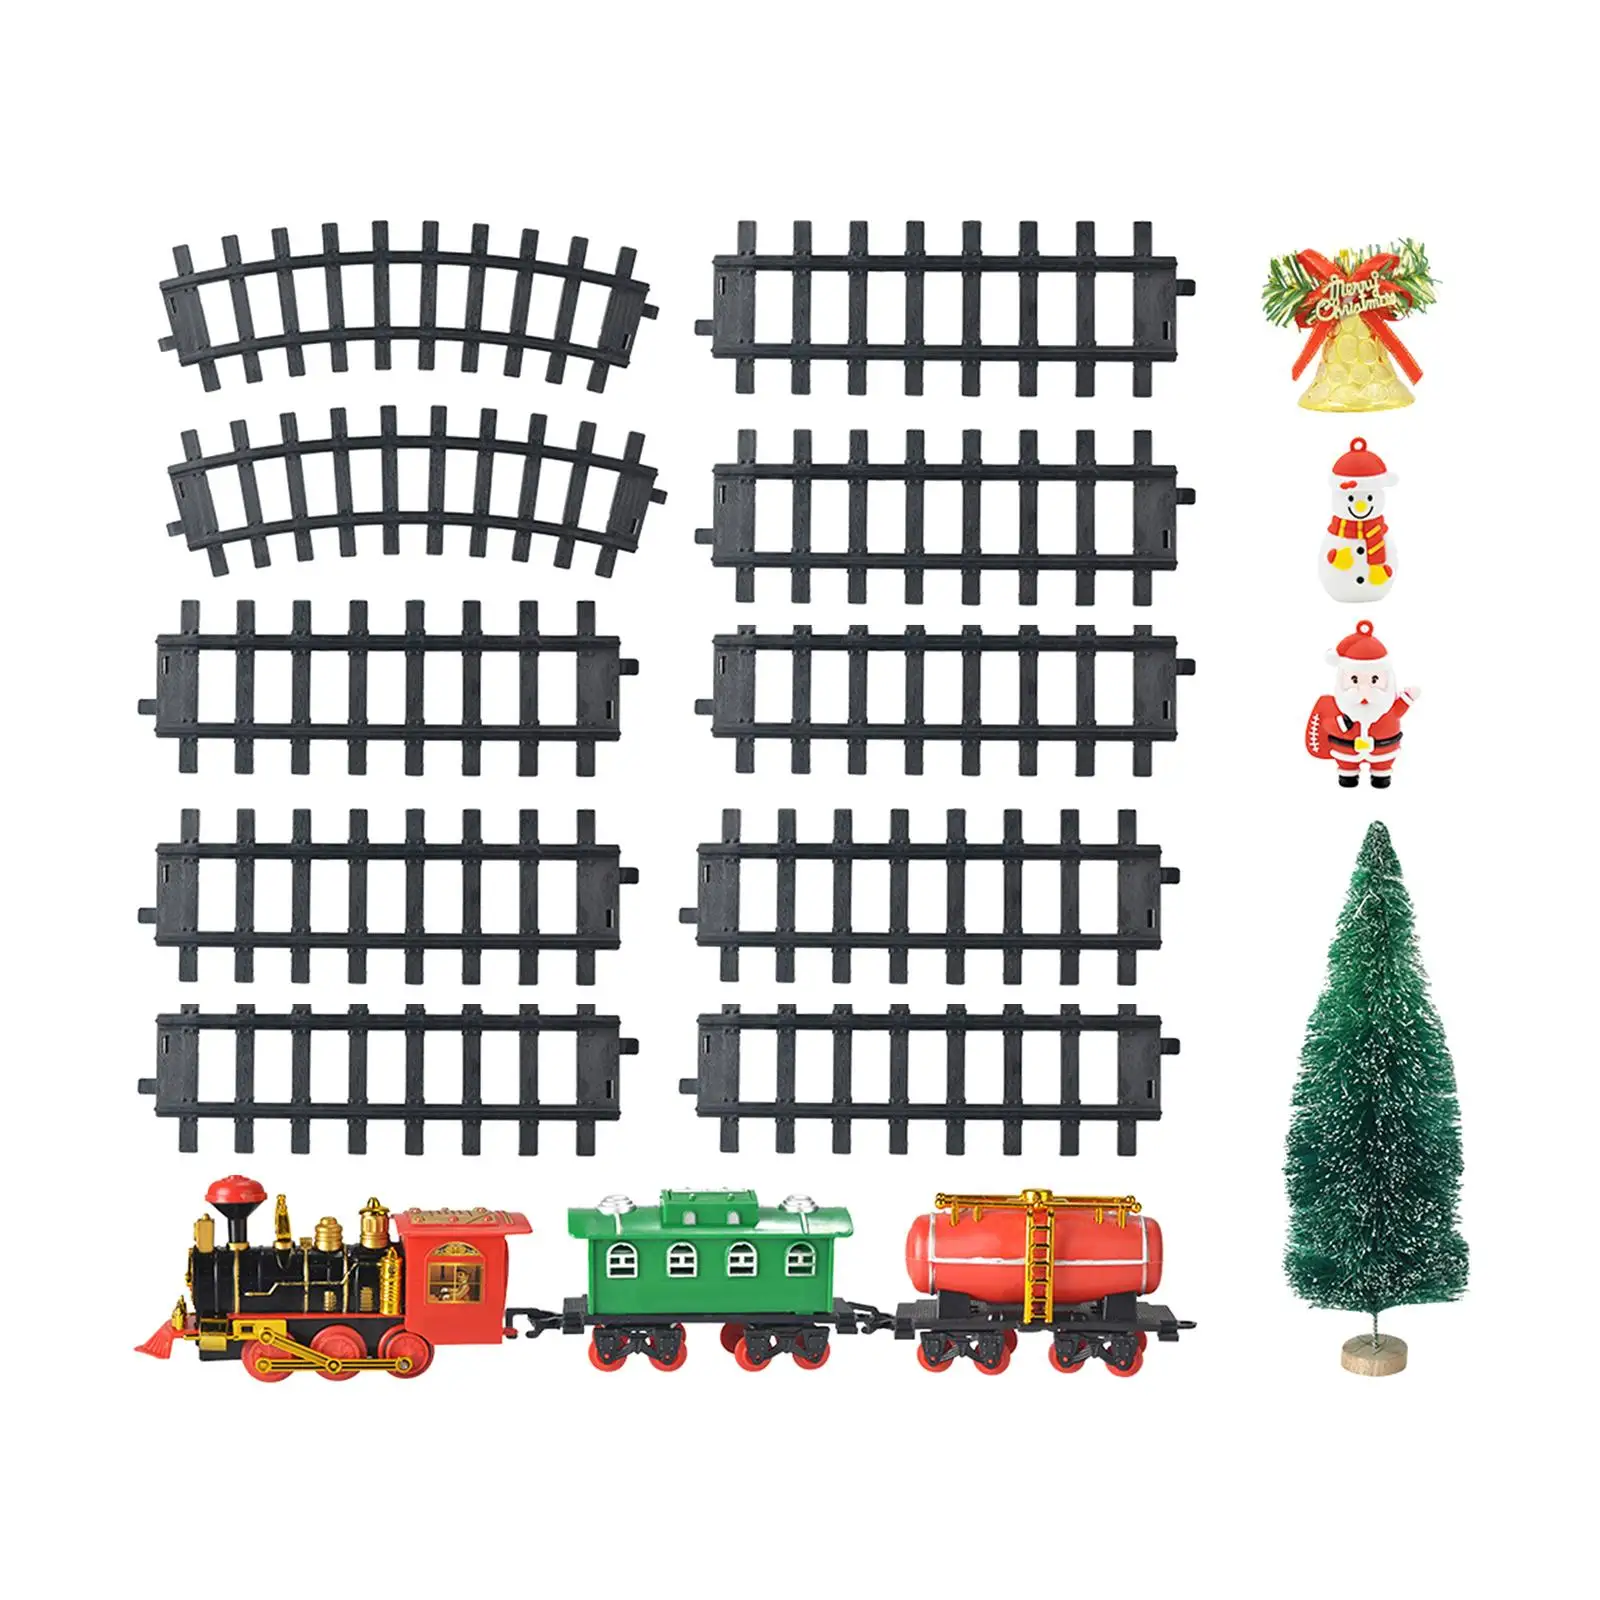 Portable Train Set Educational Learning Toy Railway Tracks Toy for Toddlers